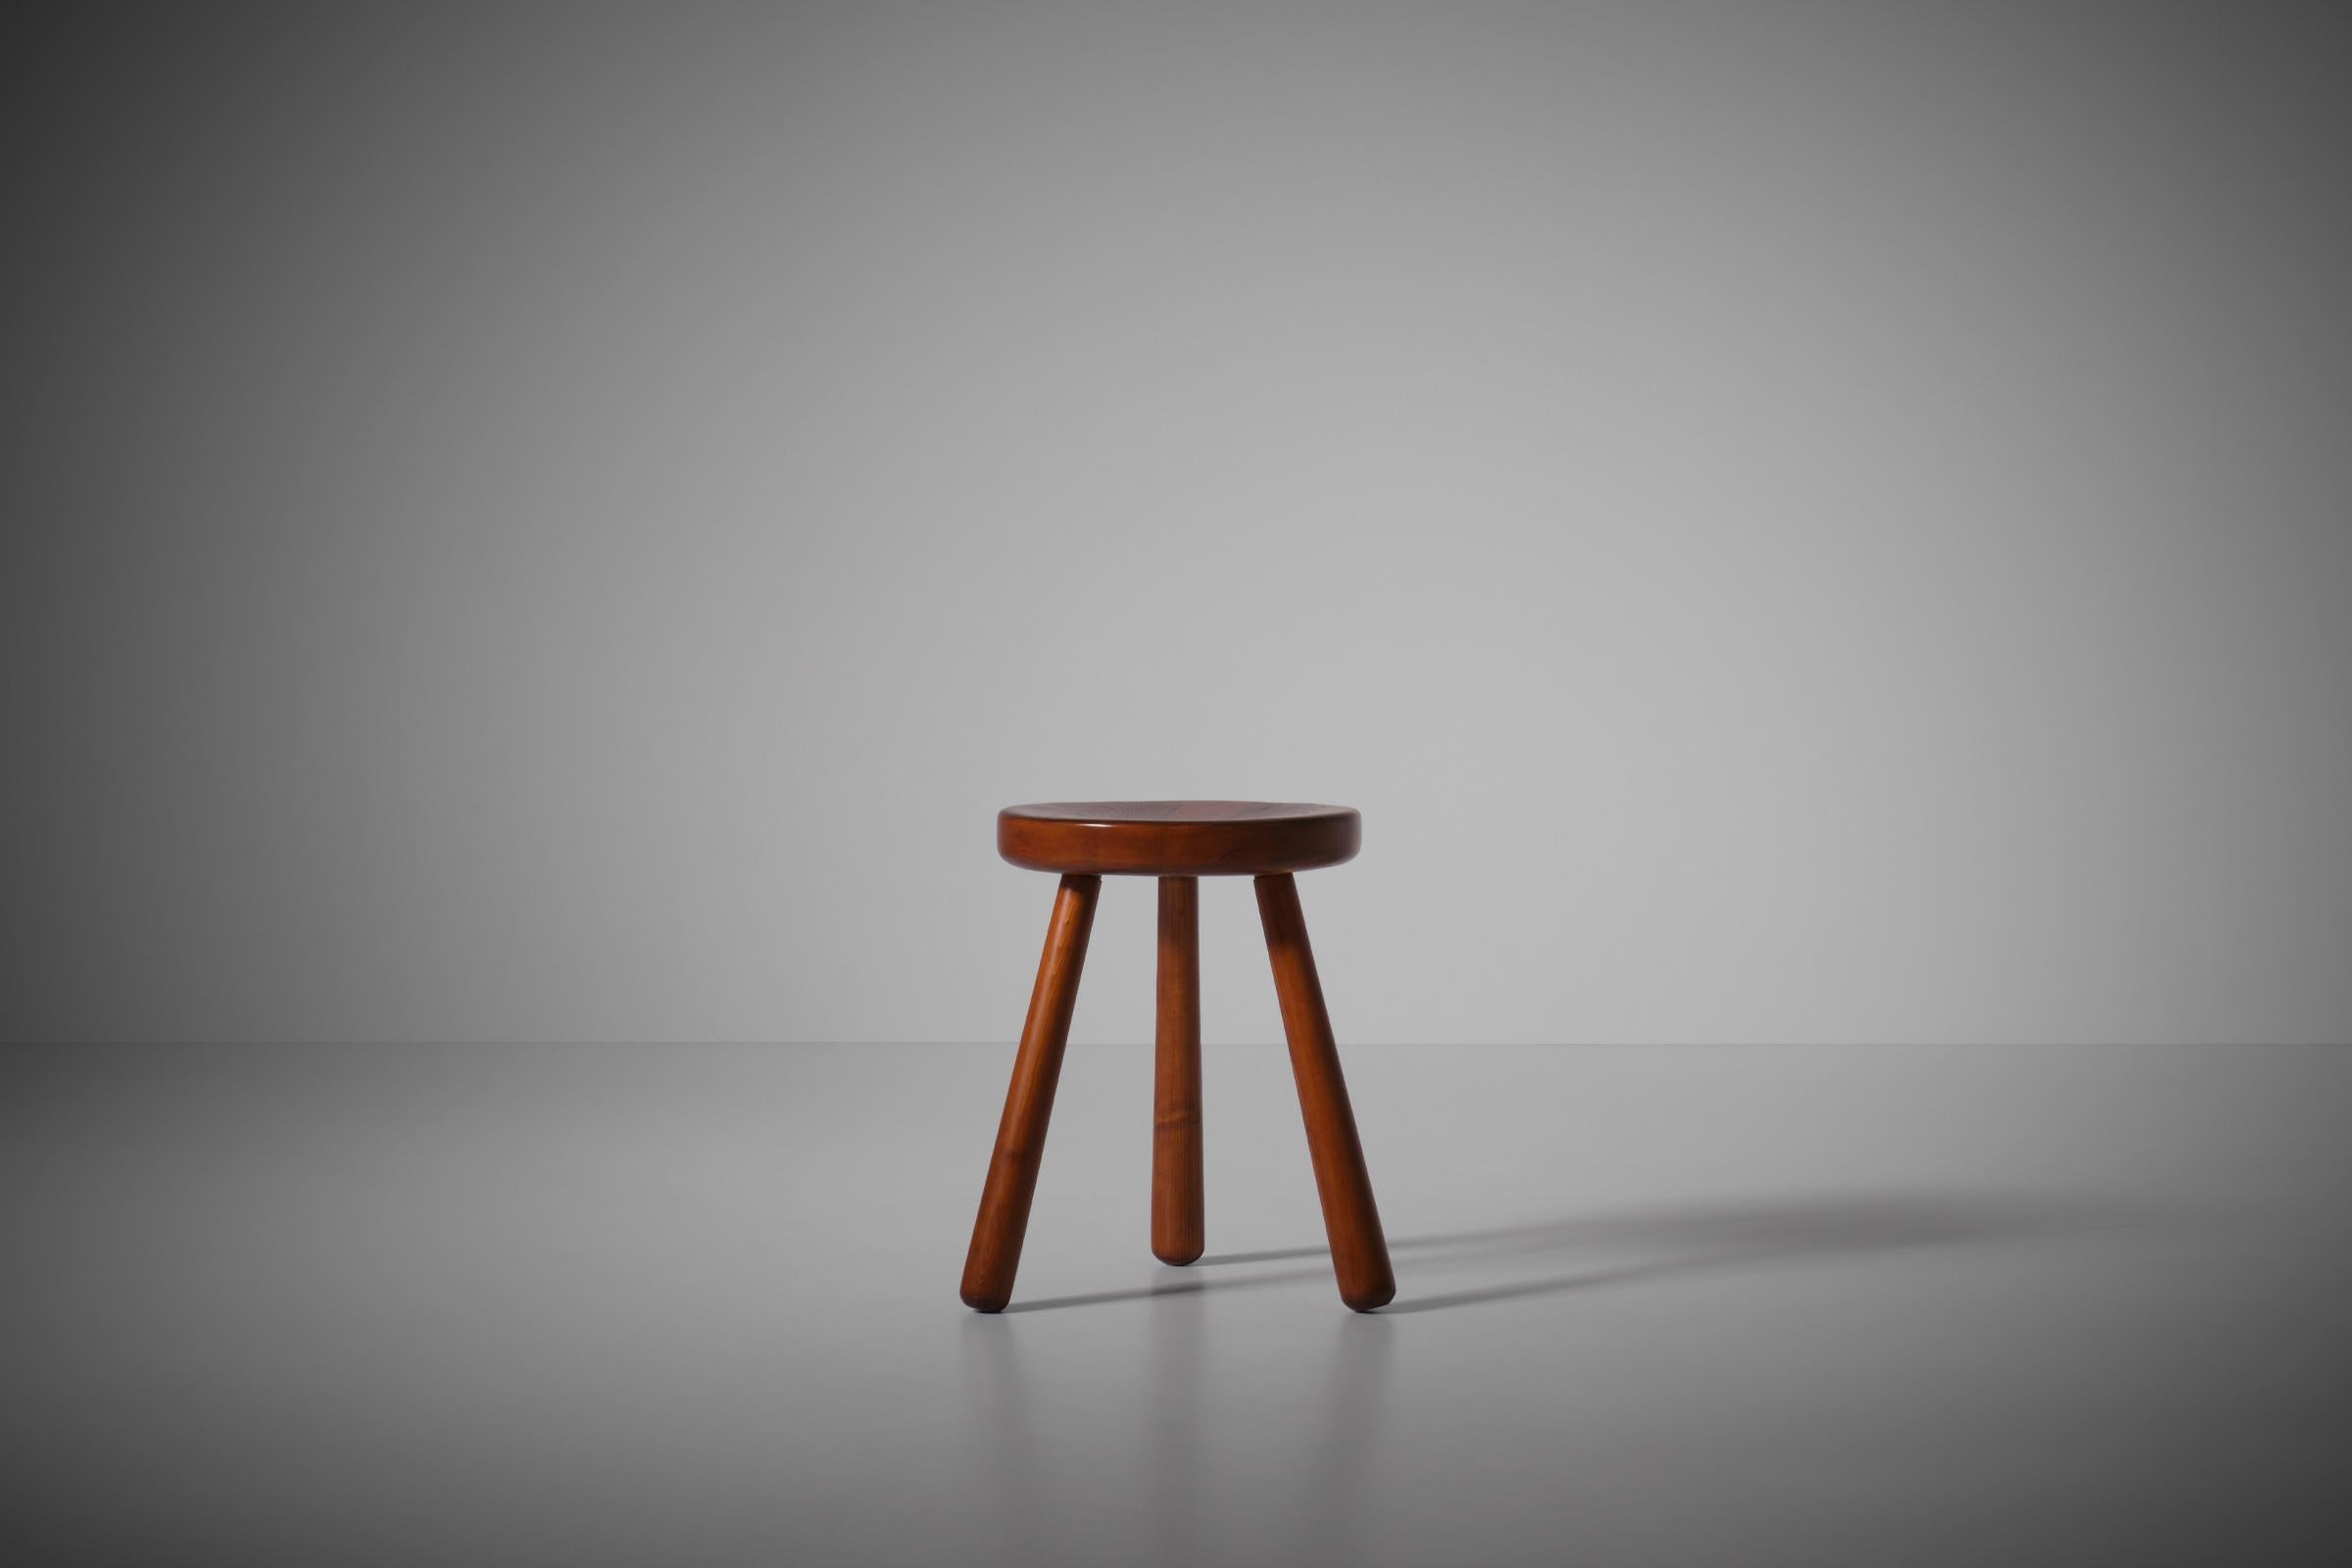 French Mid-Century Modern stool, 1960’s. Well proportioned design made of solid Pine with nice elegant curved lines and bulky legs. Made with attention and interesting details such as the finger joint connections. In good original condition with a